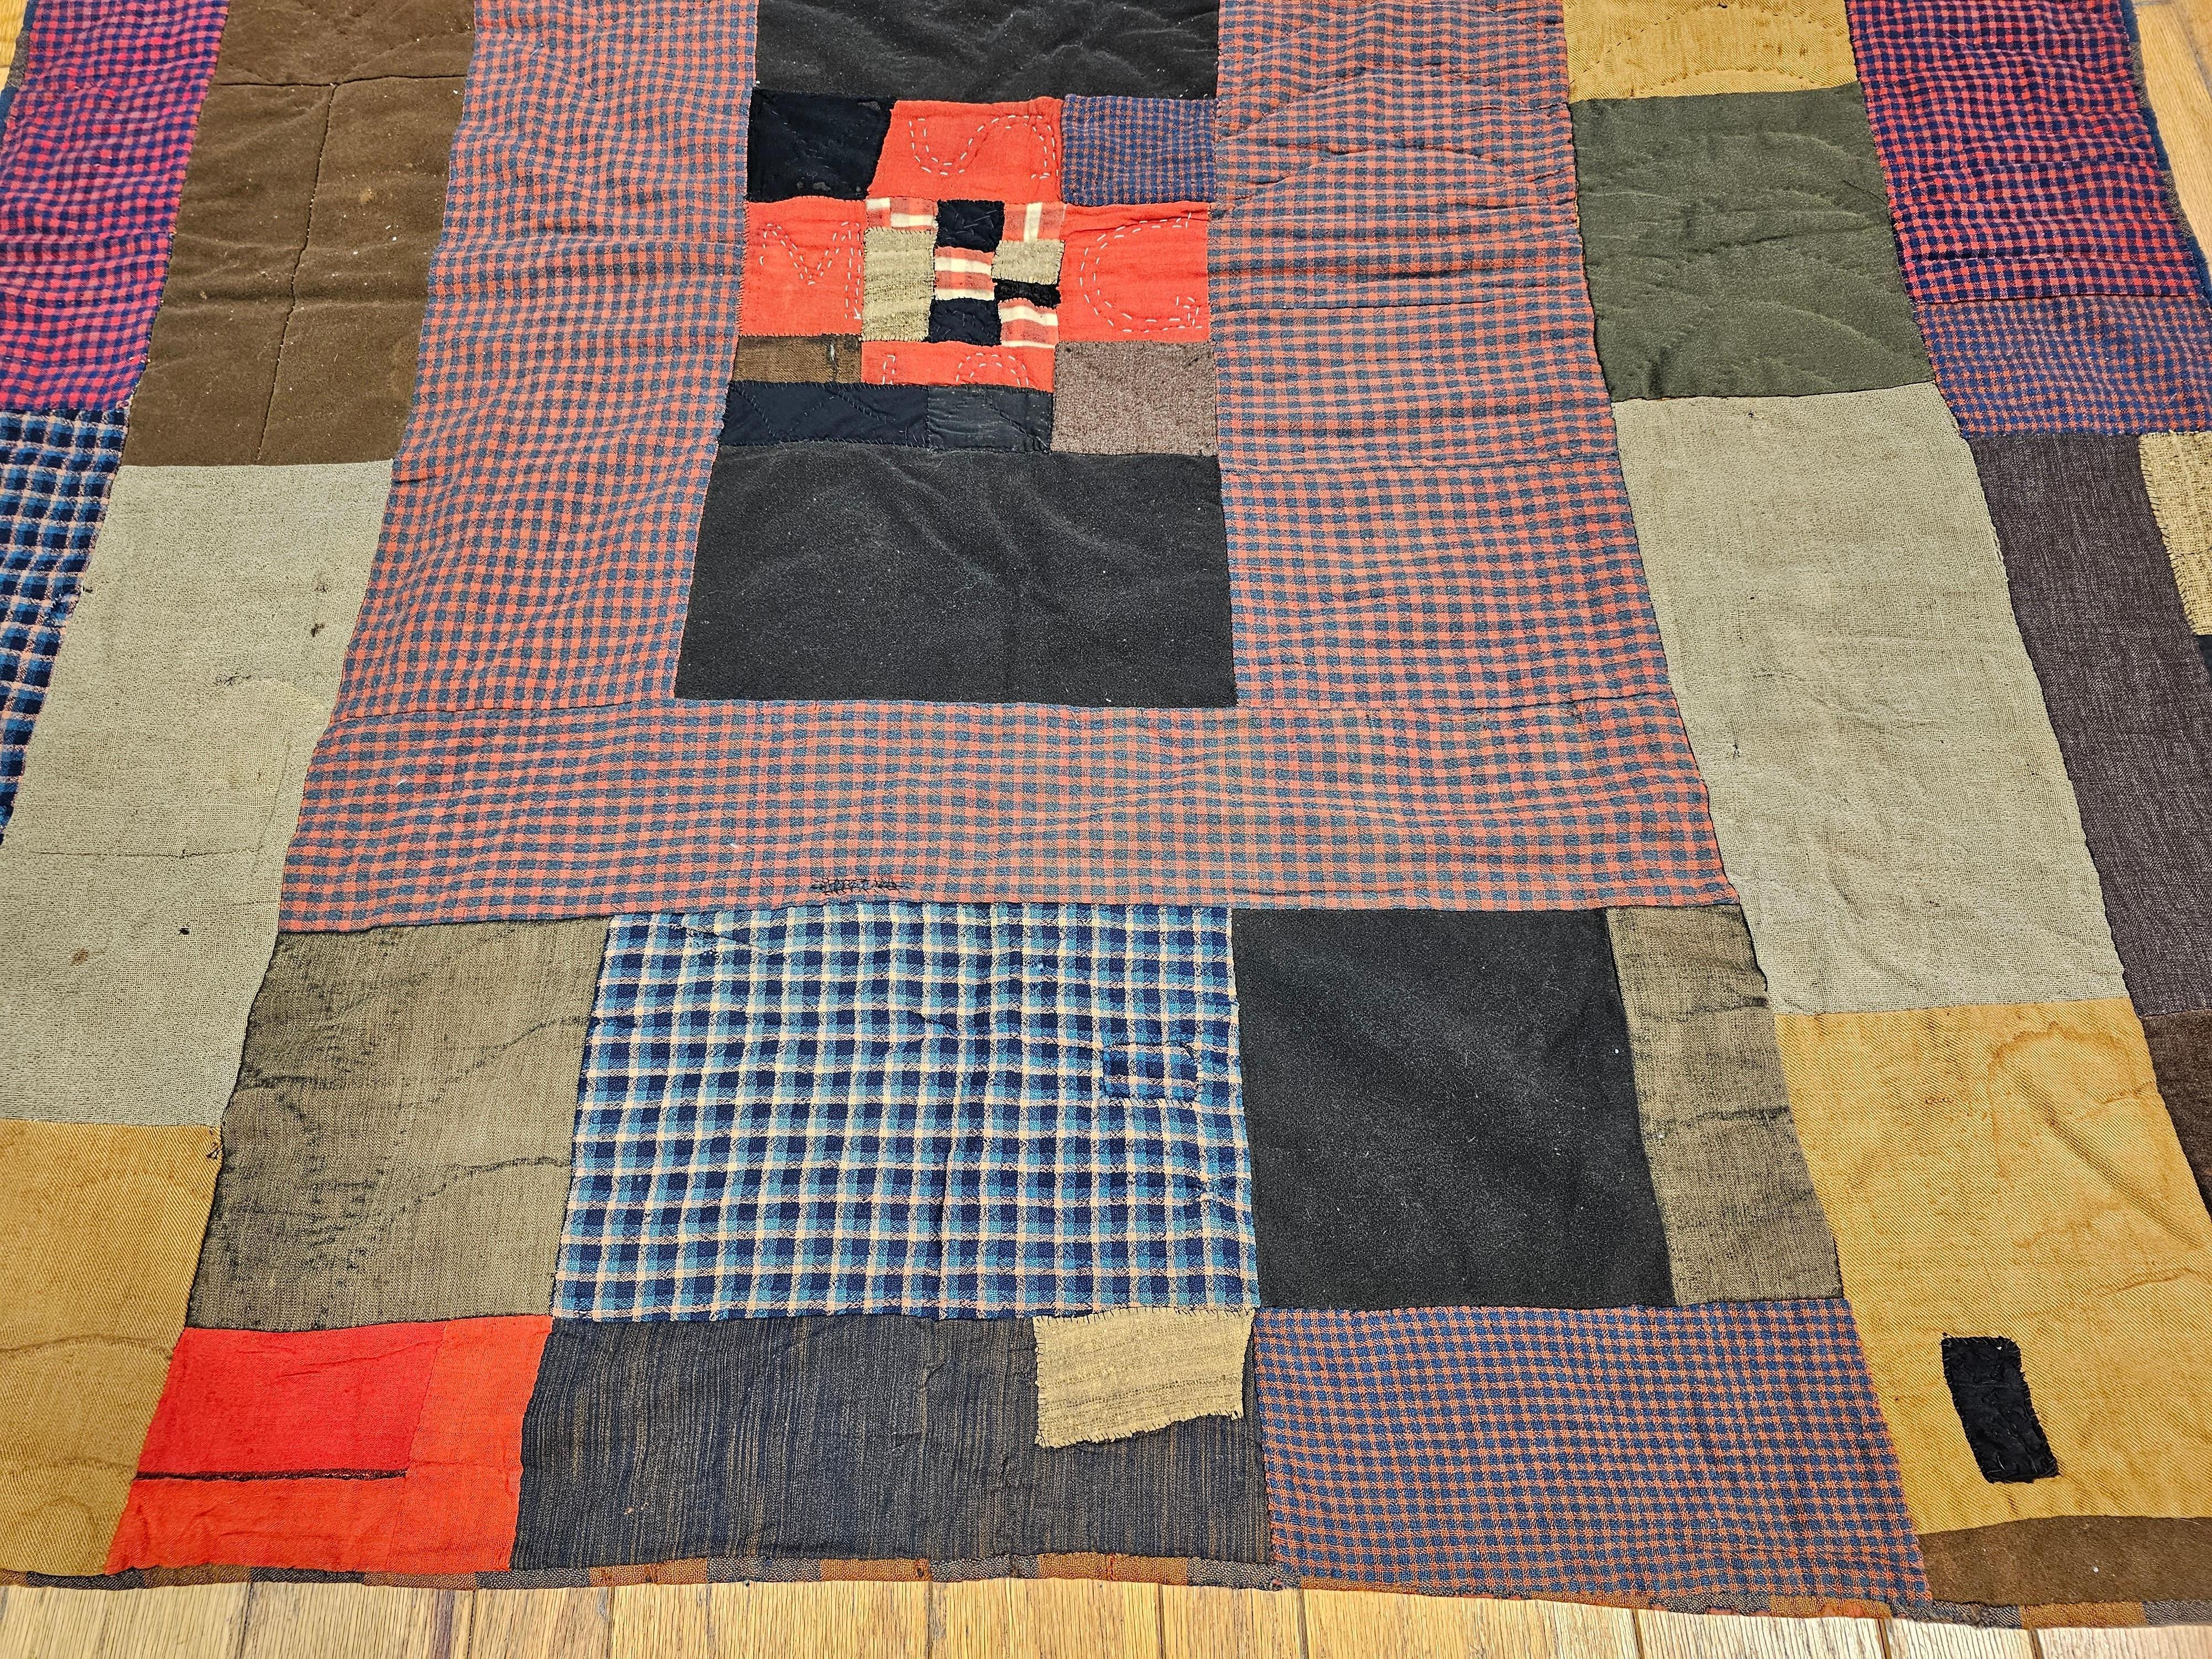 19th Century African American Southern Quilt Possibly of Gee’s Bend, Alabama 5